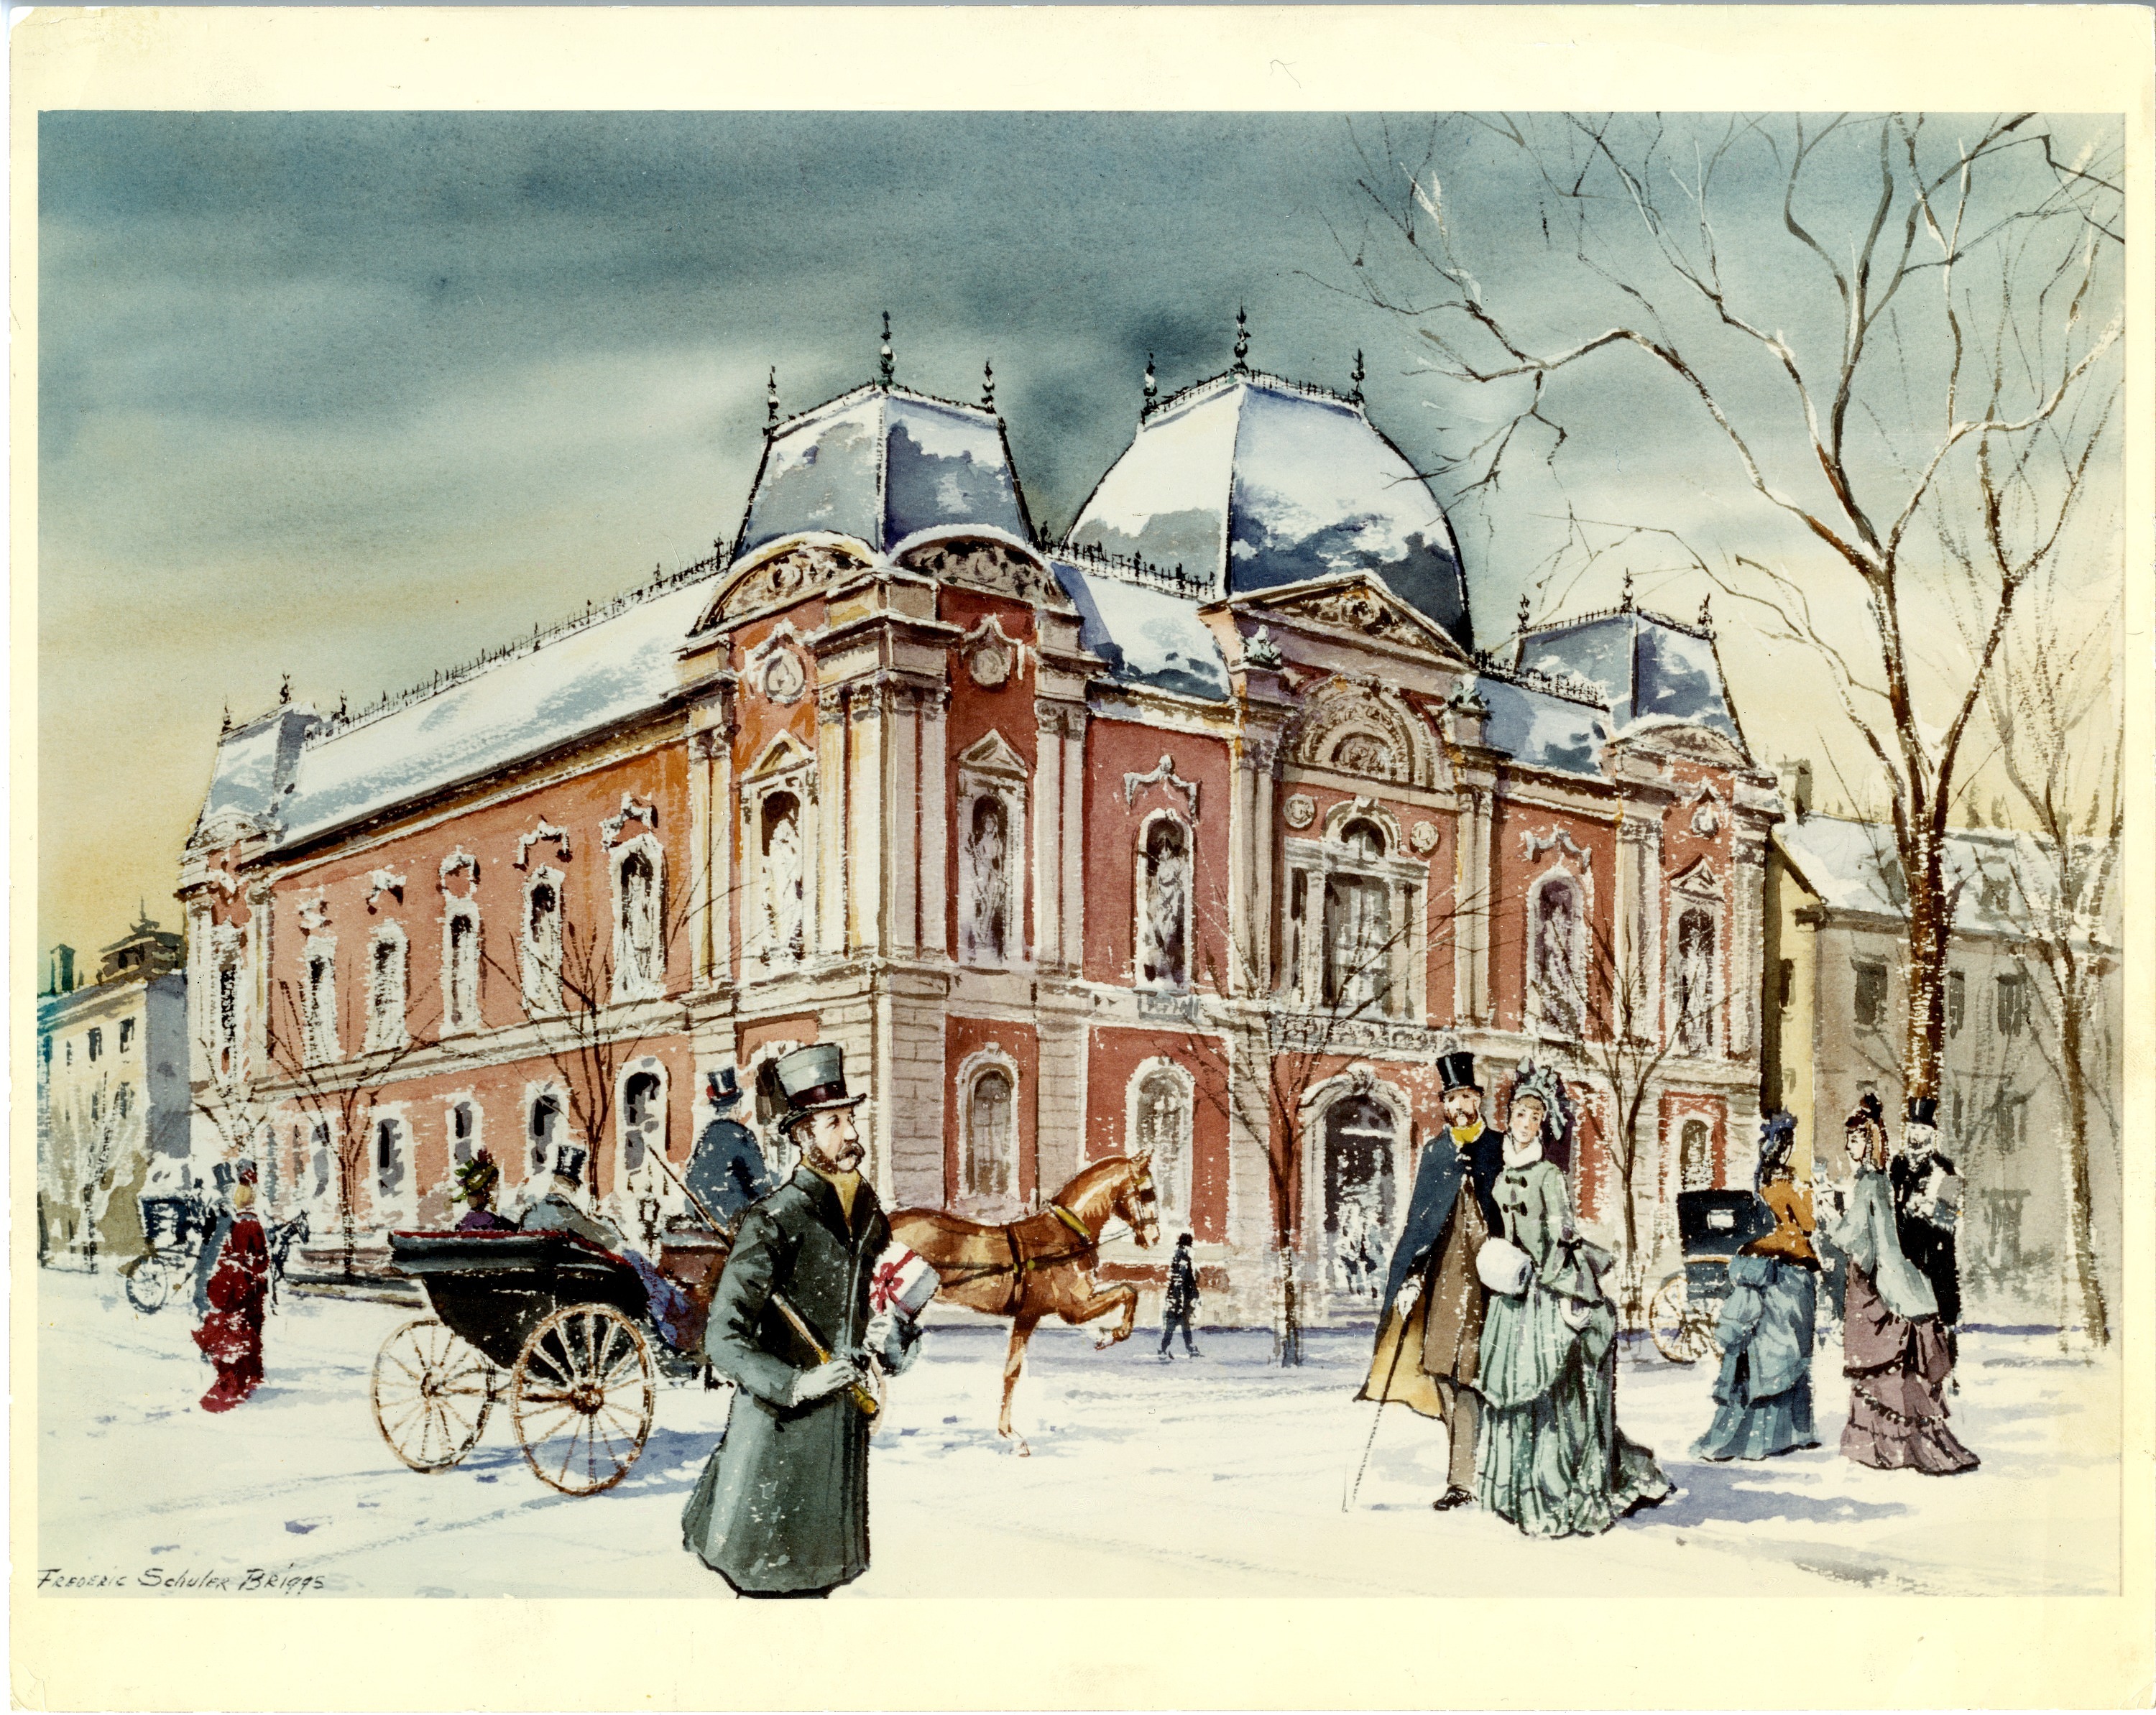 Painting of the Corcoran Gallery, now the Renwick Gallery, in the winter. People in winter overcoats stroll in front of the building. 